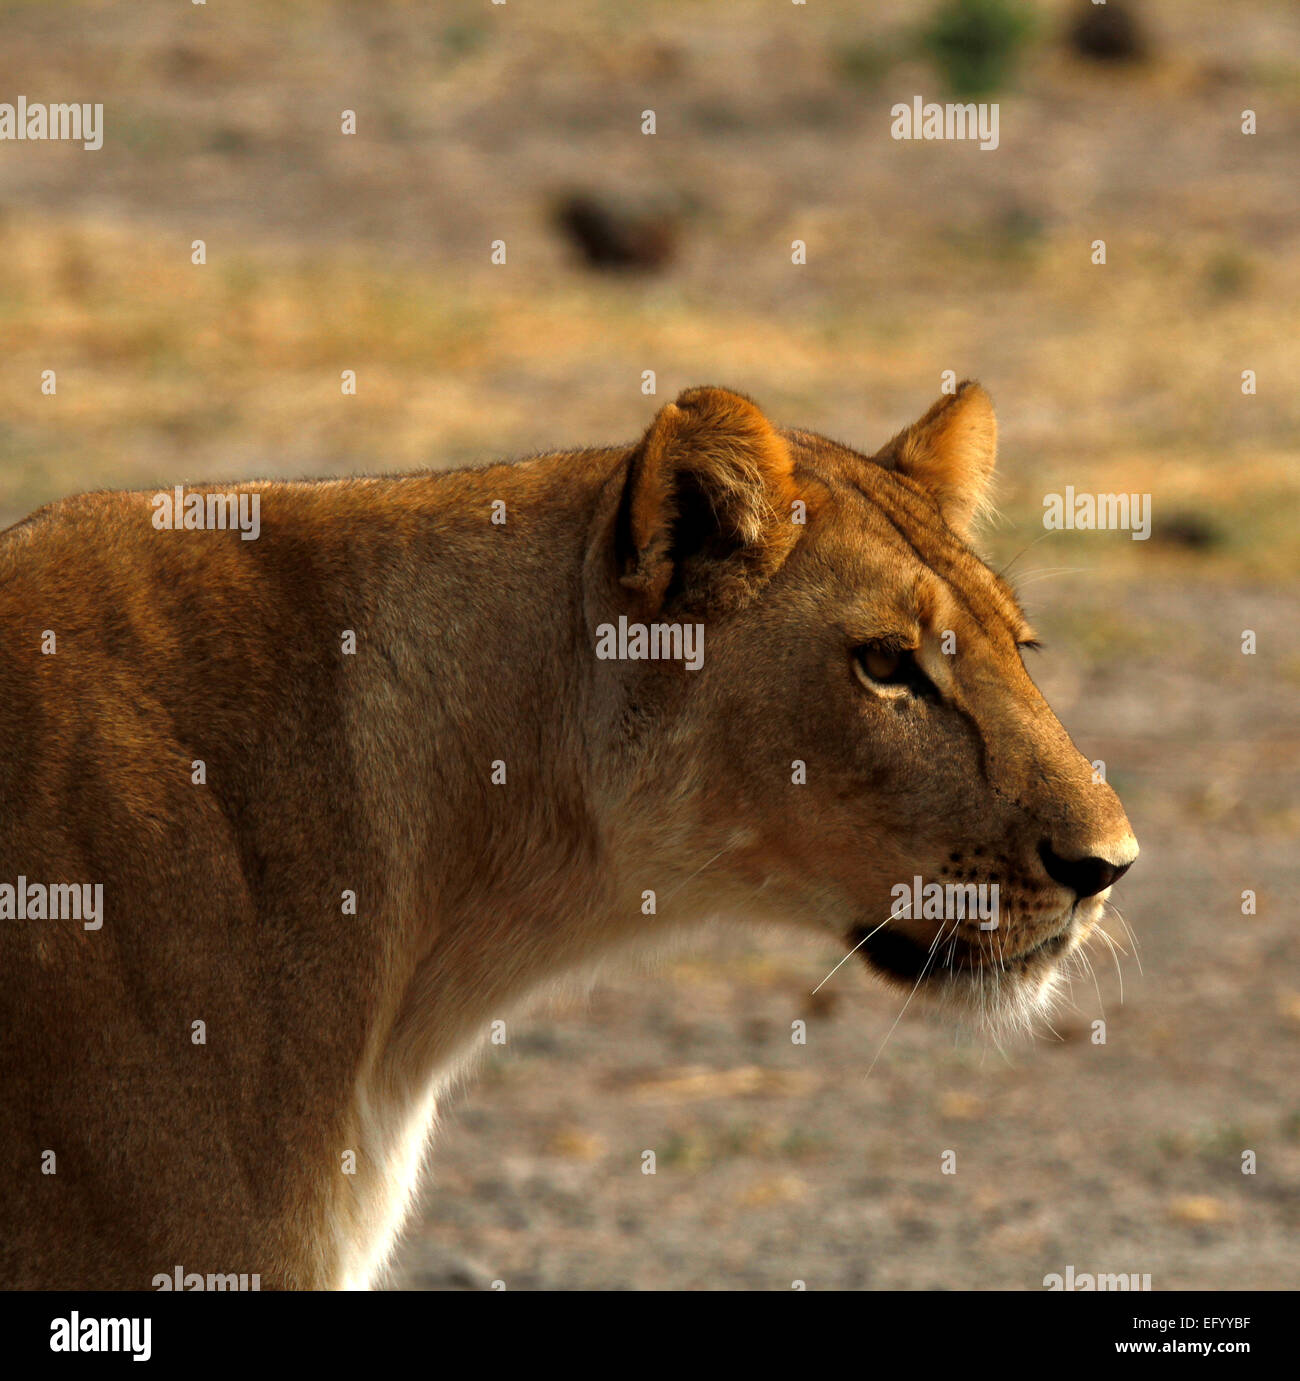 Square picture of an African lioness head close up, beautiful golden color very regal animals Stock Photo